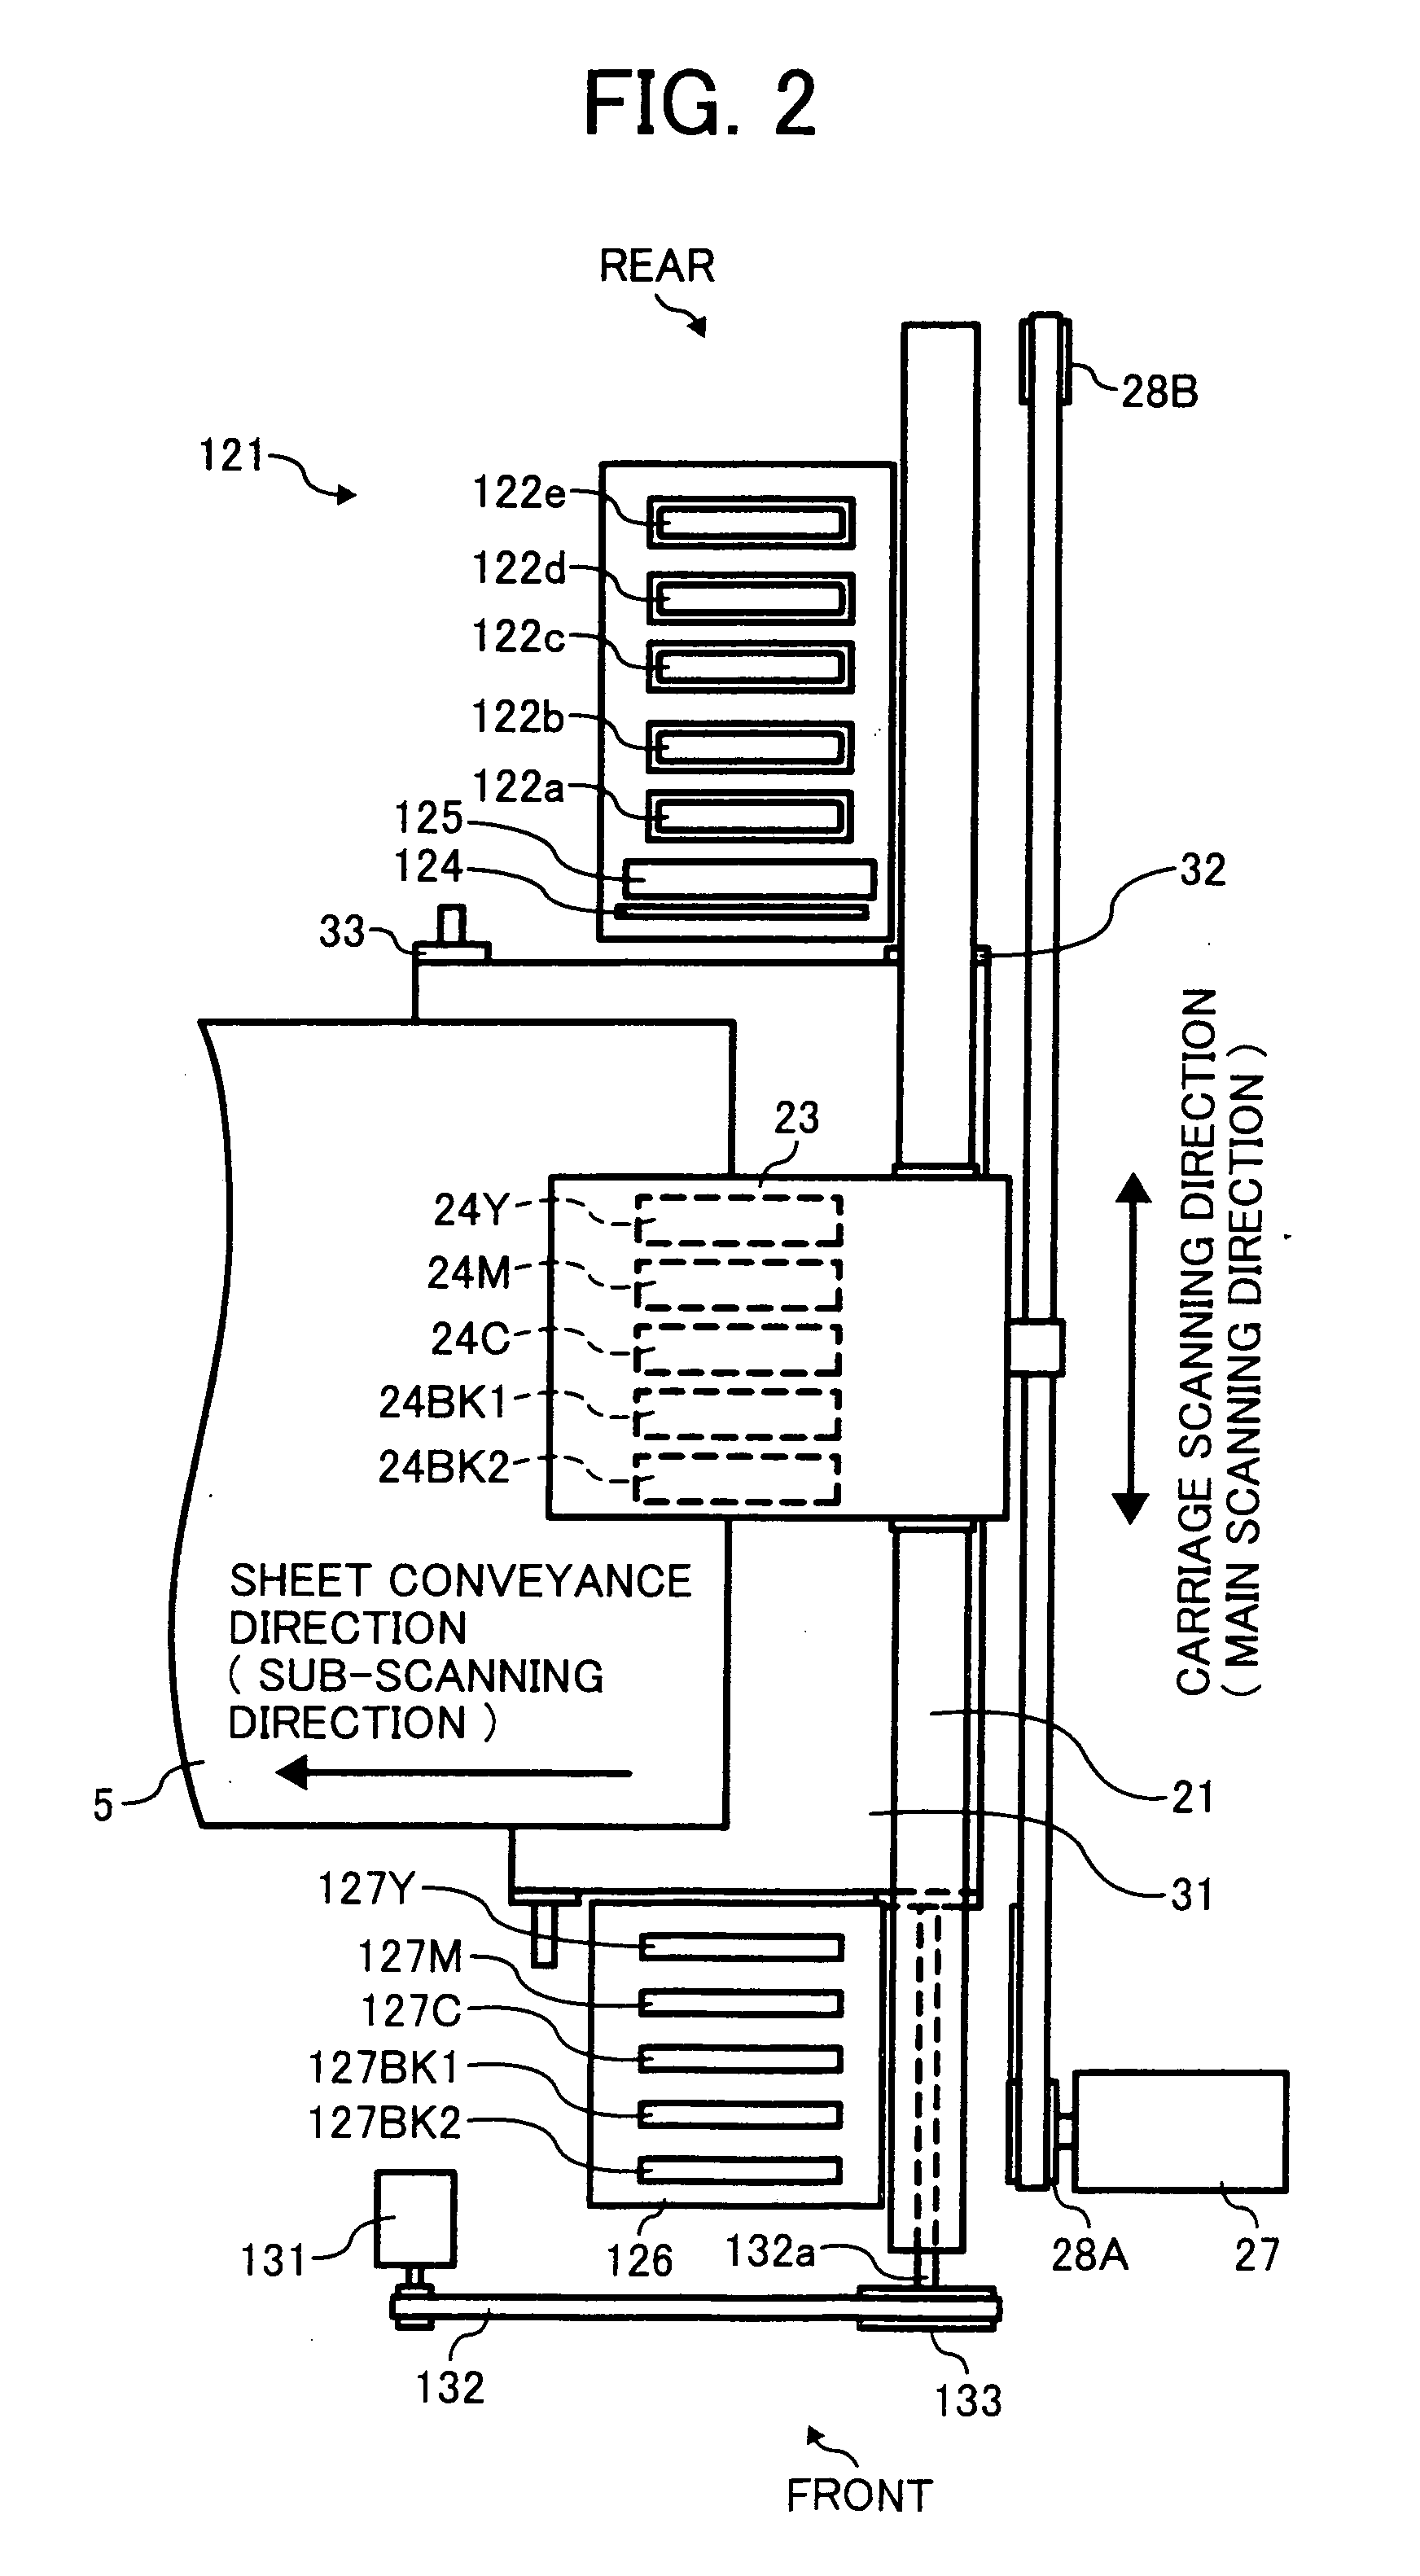 Image forming apparatus including an electrostatic conveyance apparatus capable of stably conveying a recording medium